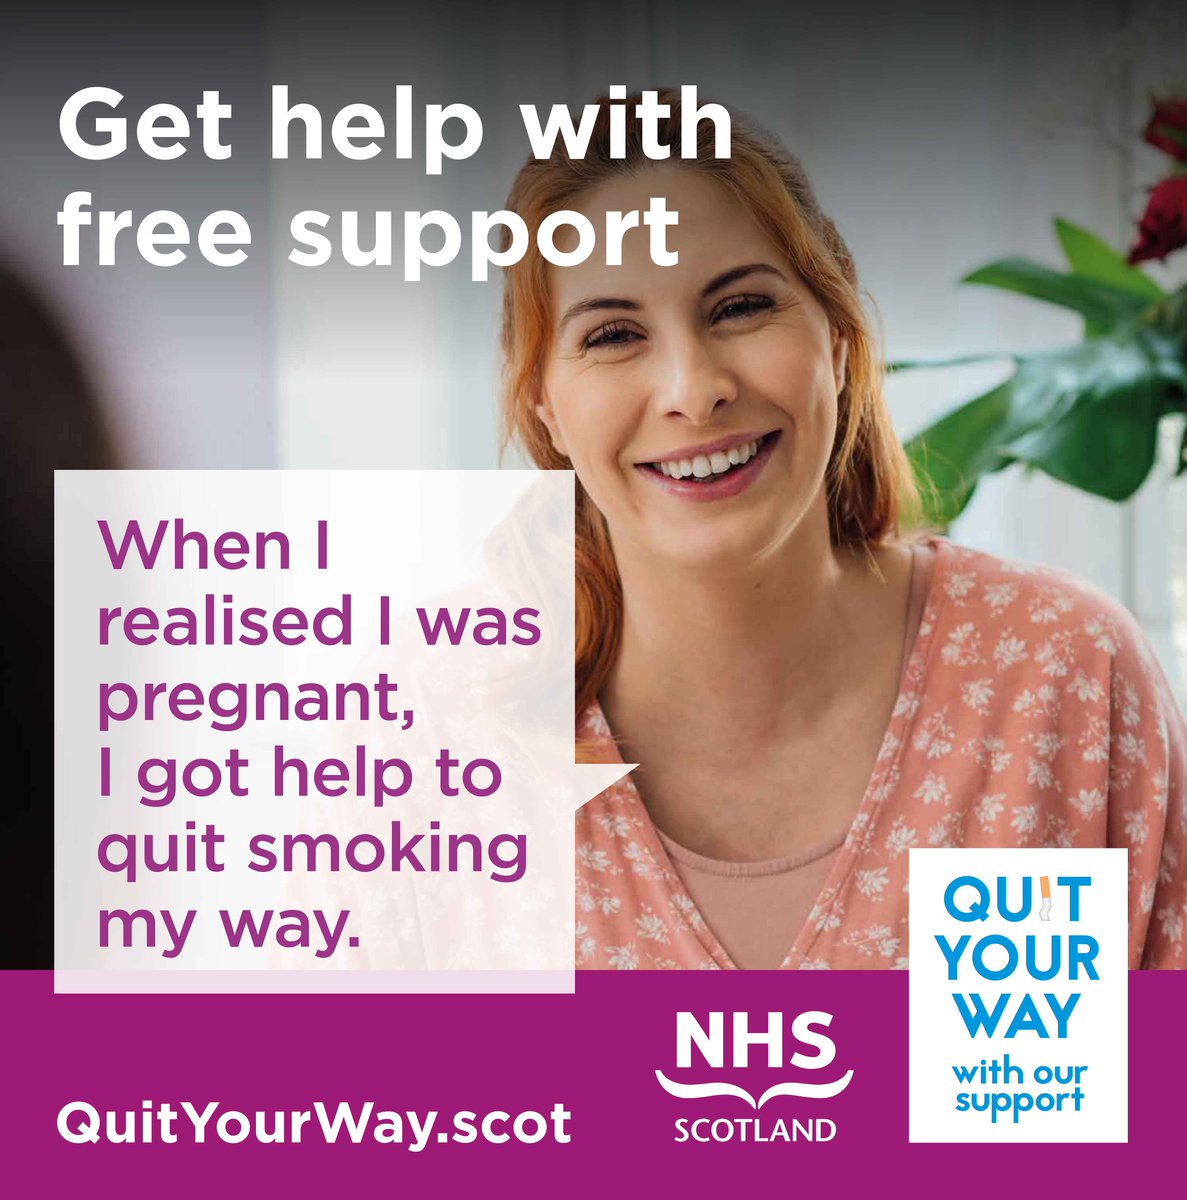 Giving up smoking is one of the best things you can do for your baby. The earlier you stop smoking in your pregnancy, the better. Quit Your Way Scotland is here with free advice and support. Get started at QuitYourWay.scot #QuitYourWay